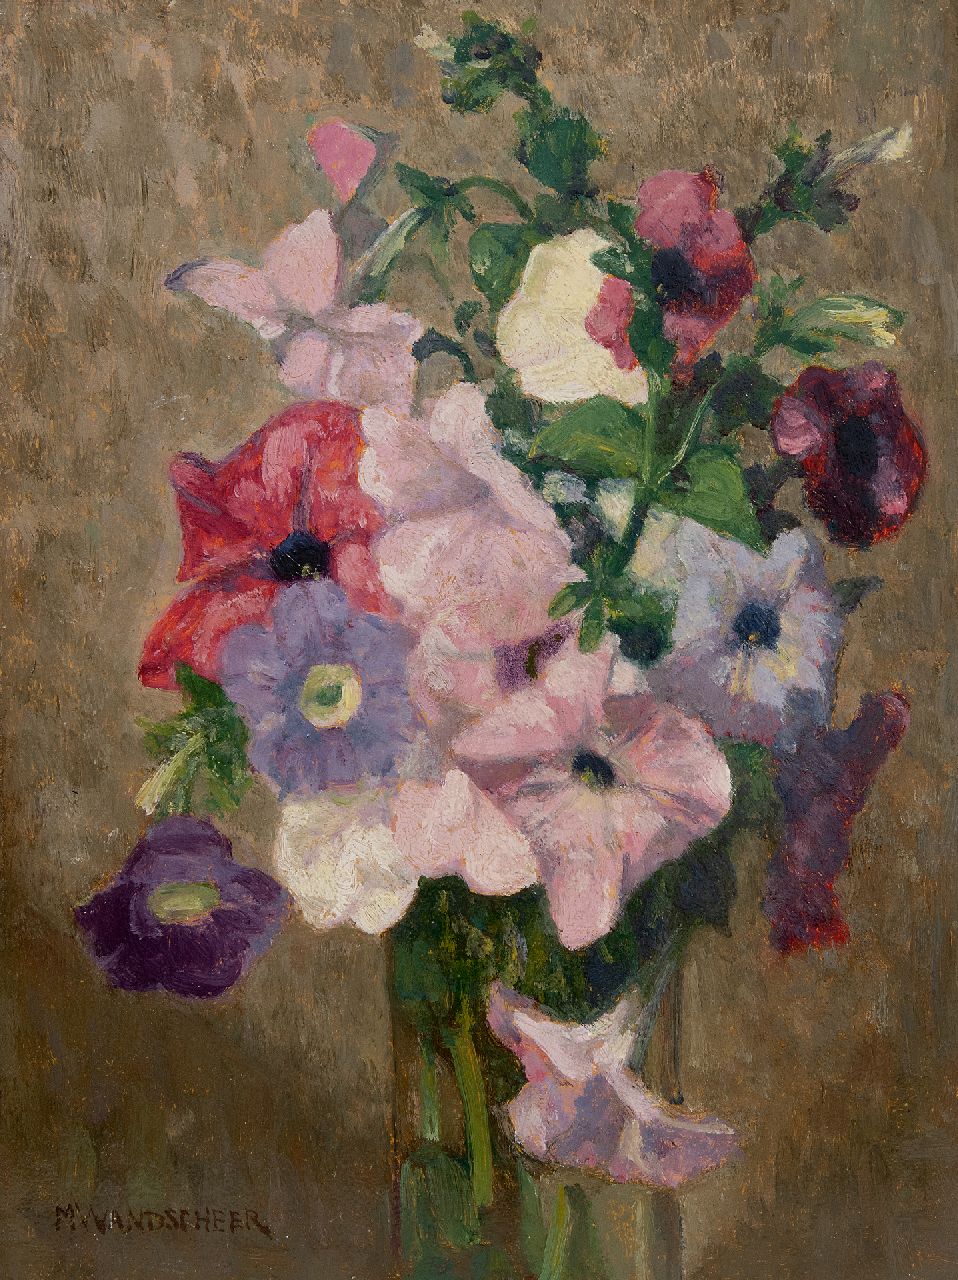 Wandscheer M.W.  | Maria Wilhelmina 'Marie' Wandscheer | Paintings offered for sale | Flower stilllife with petunias, oil on panel 32.2 x 23.6 cm, signed l.l.